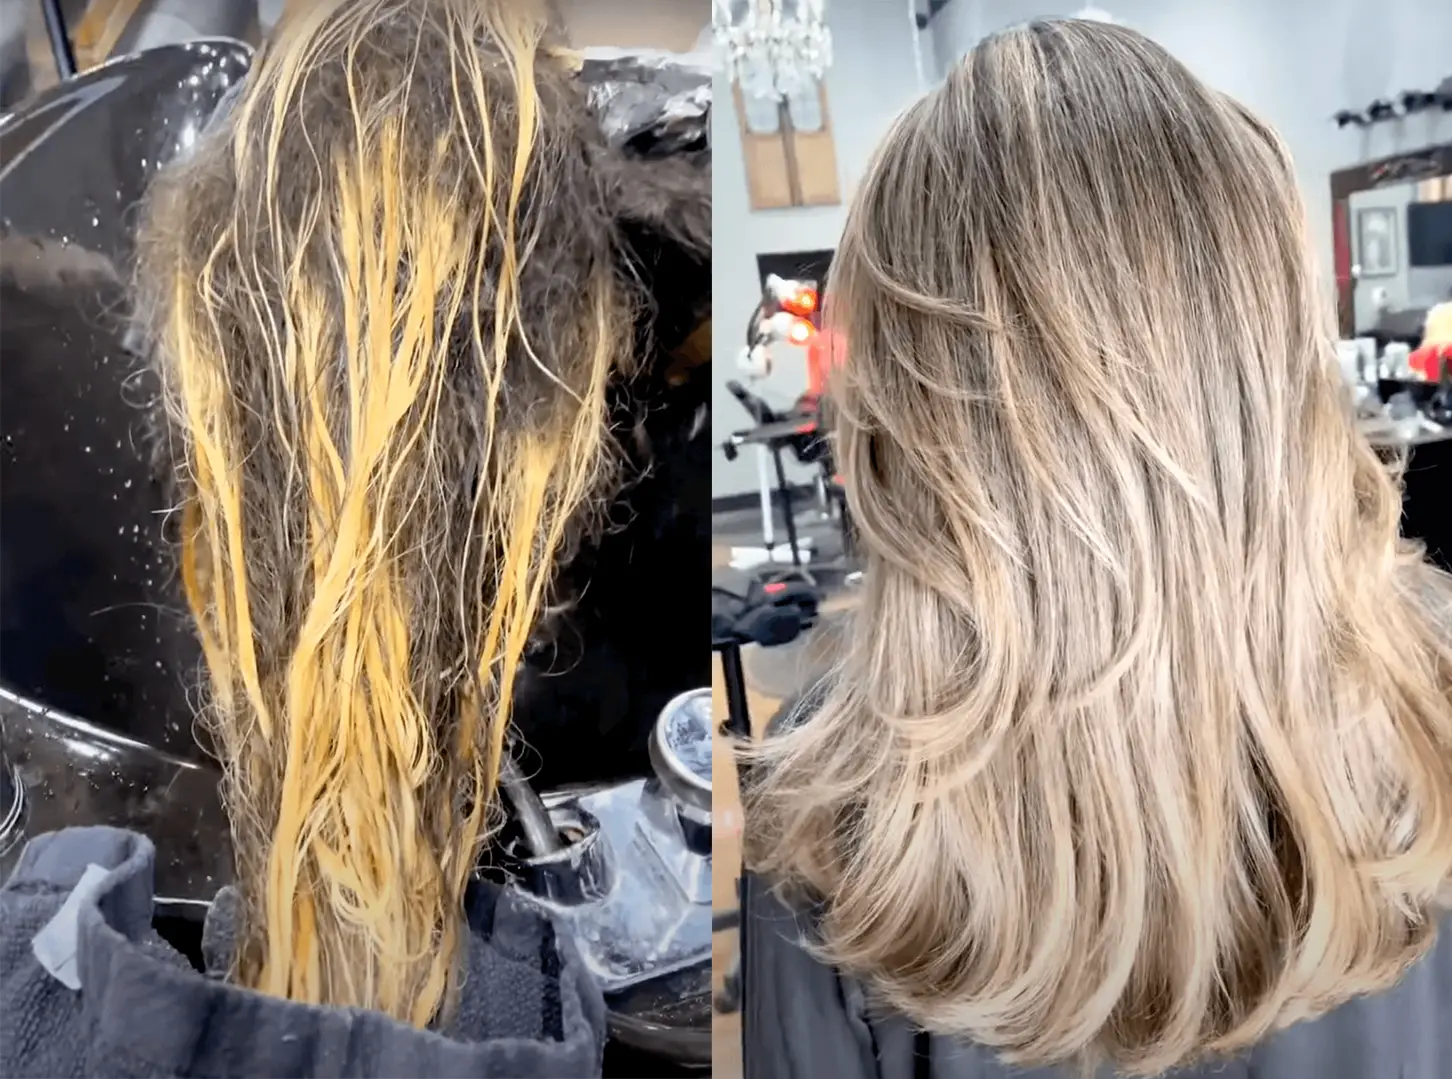 Blonde Before And After - Ugly